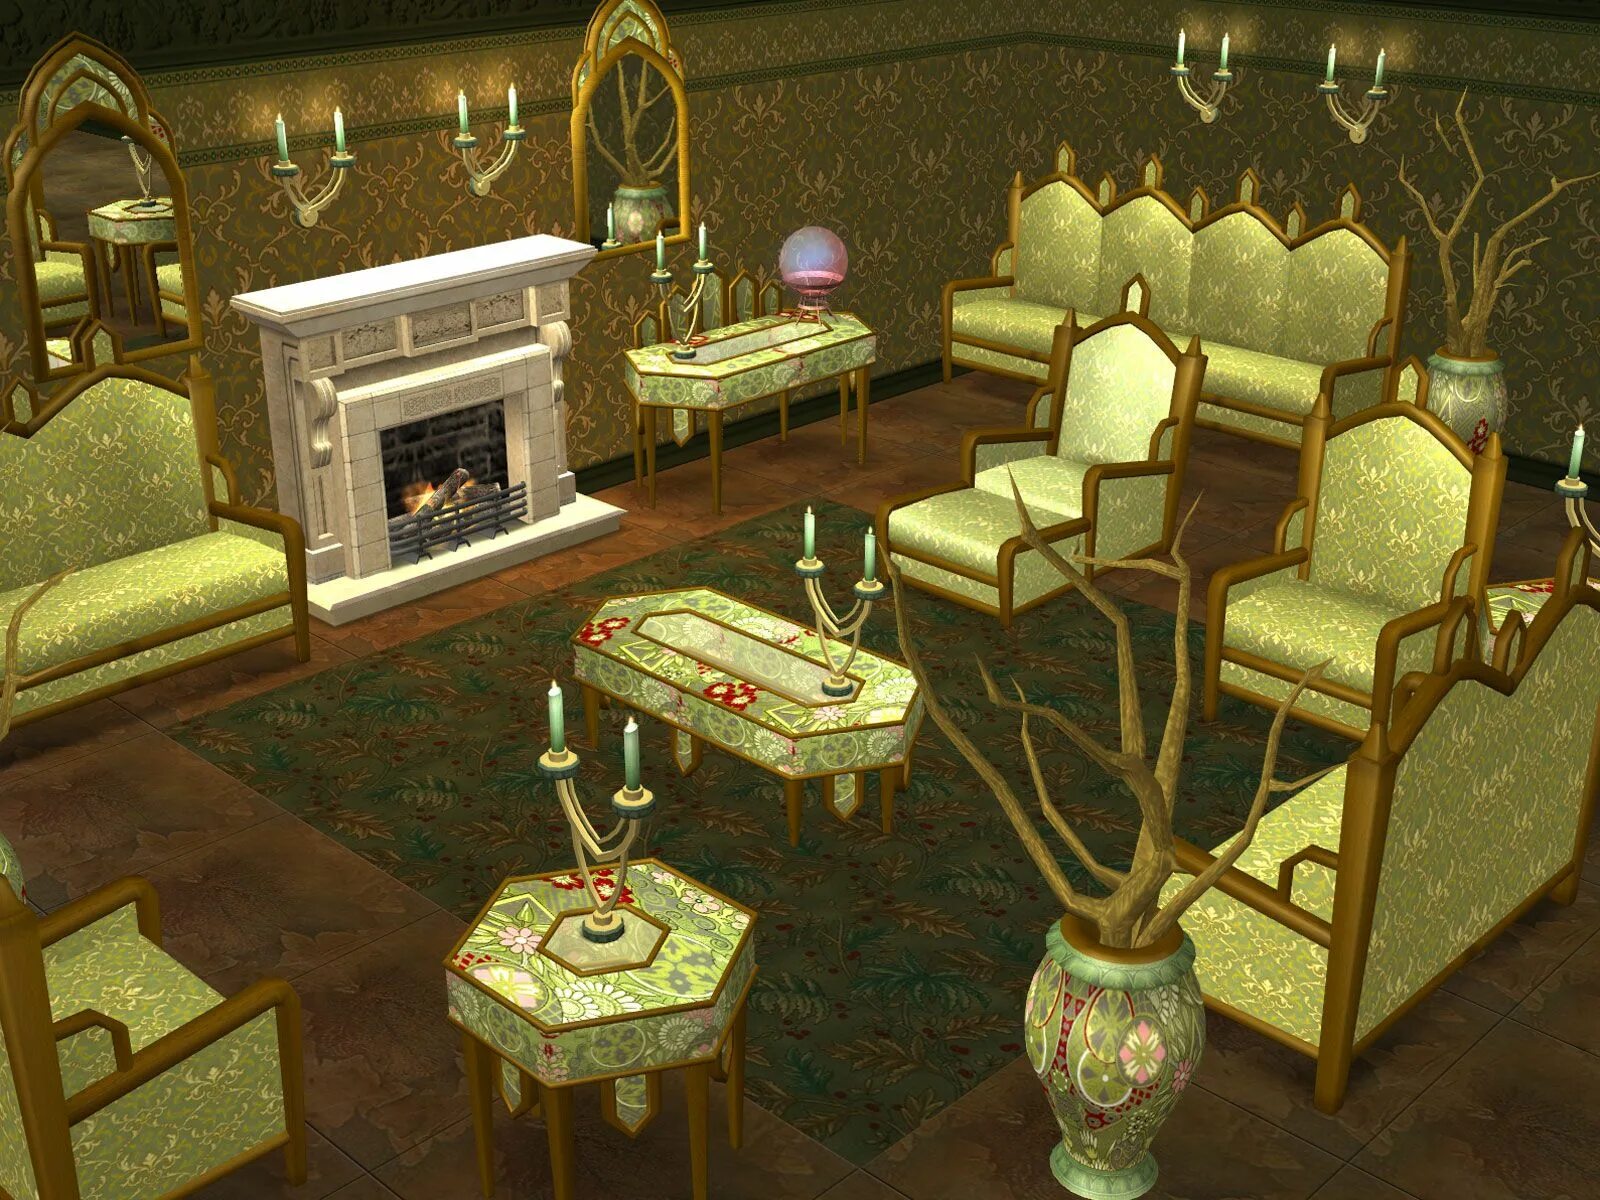 Sims objects